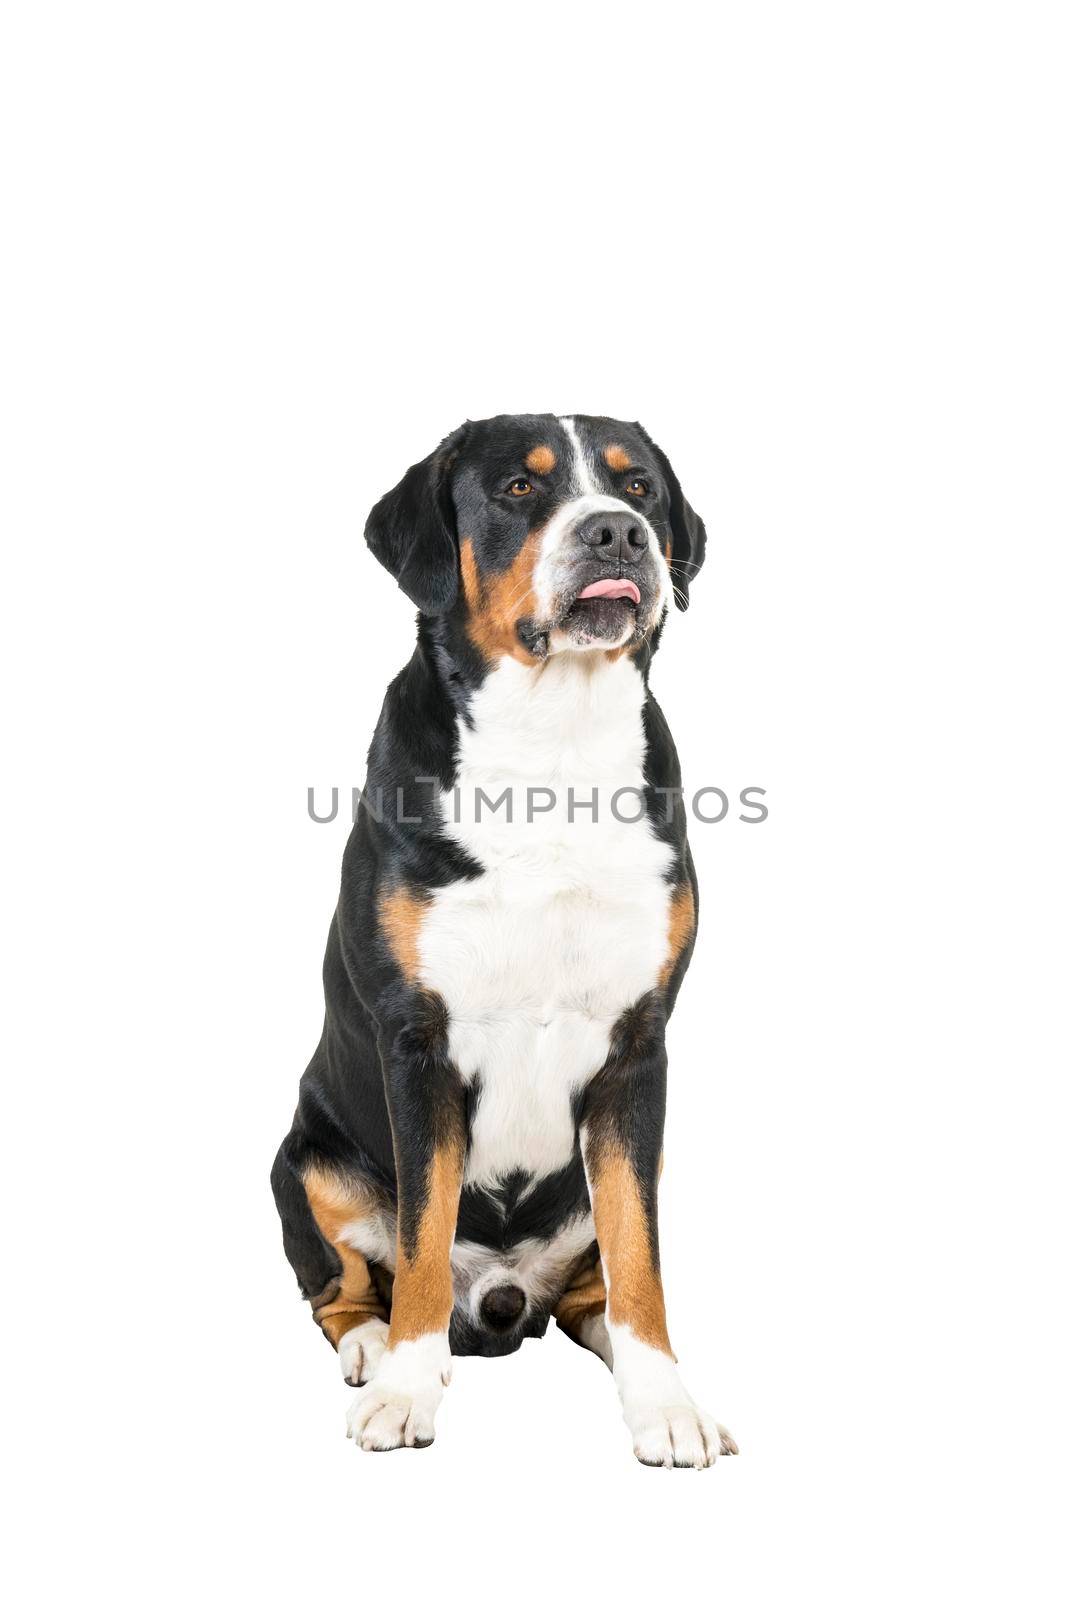 Greater Swiss Mountain Dog sitting and looking up to the camera by LeoniekvanderVliet